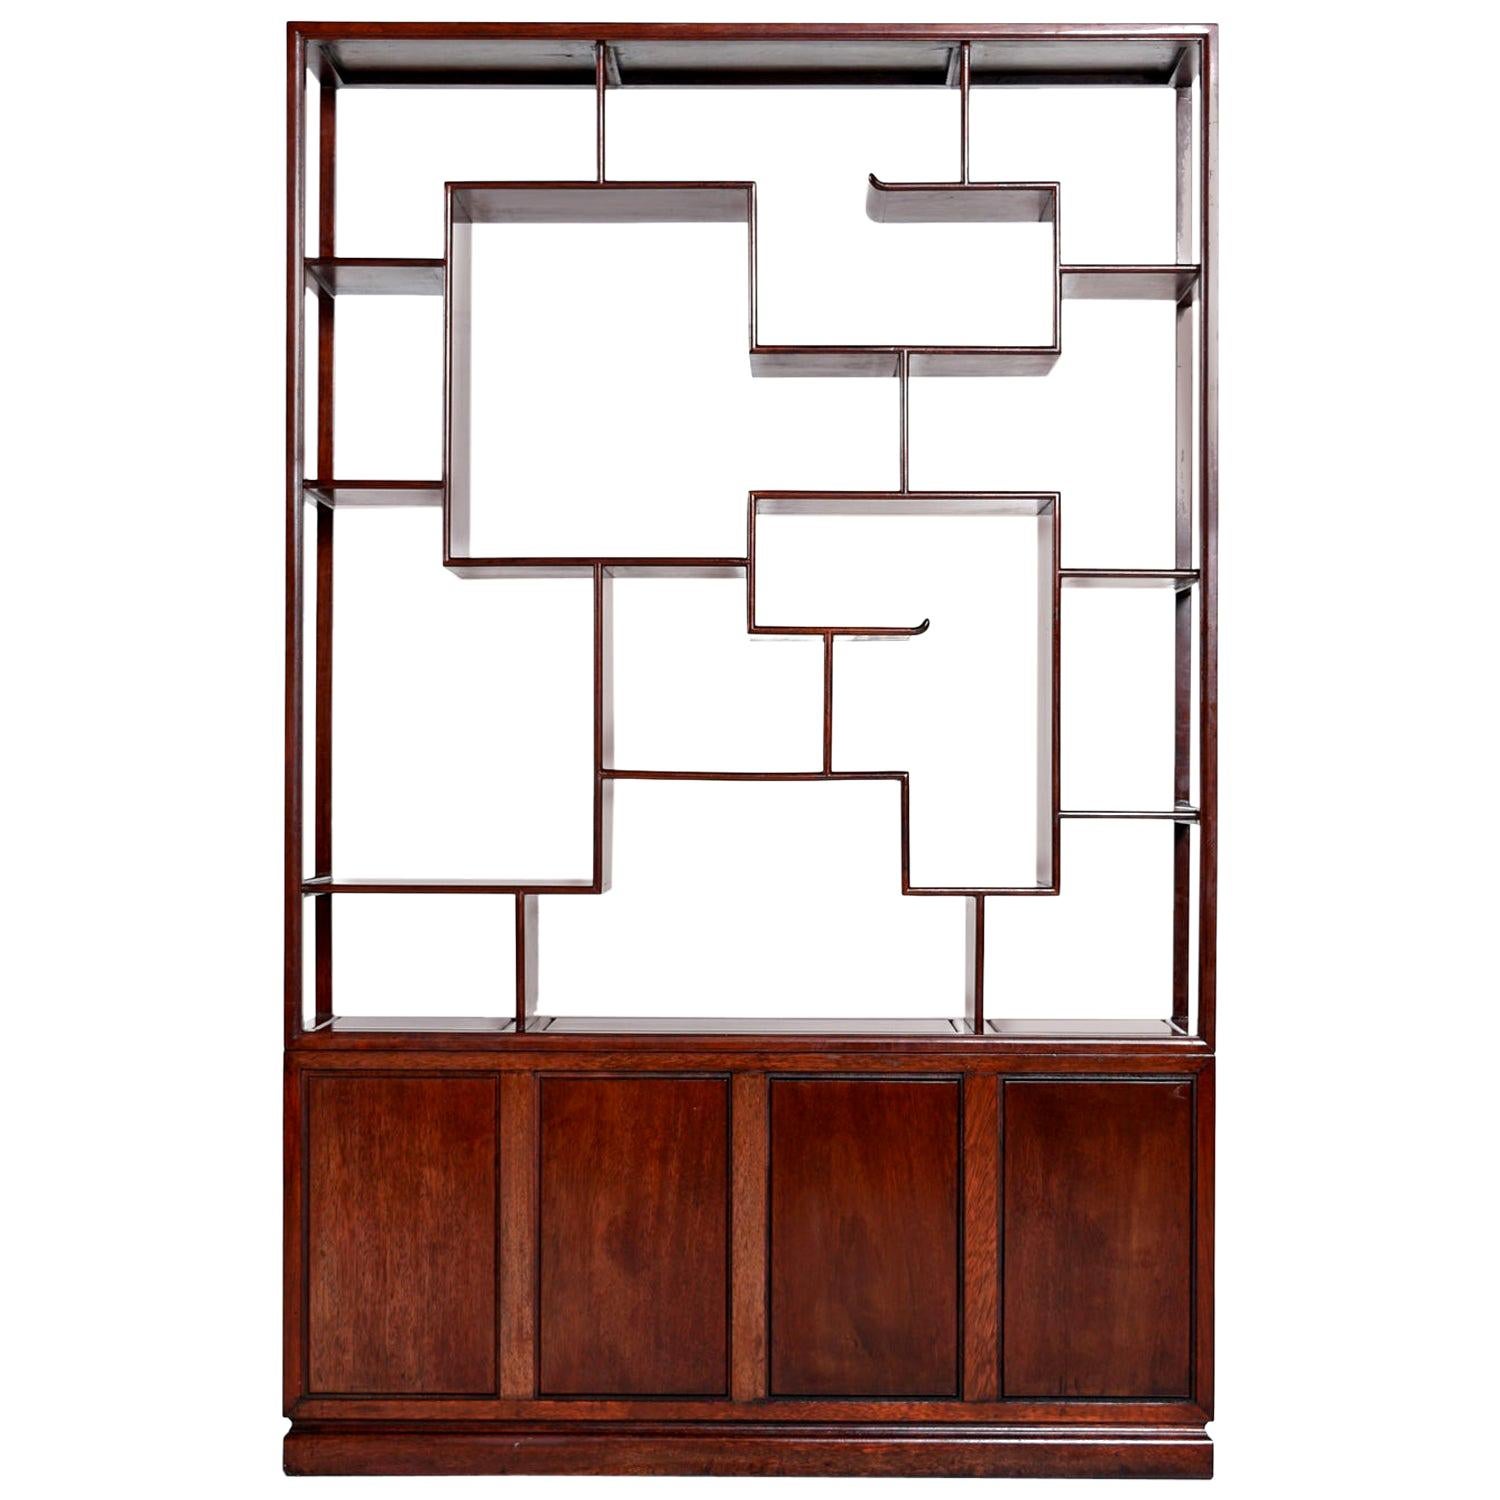 Gorgeous Asian modern chinoiserie open two-piece solid rosewood wall unit room divider. Stands on its own and is finished on both sides, so it can act as a room divider. The bottom section offers open cabinet space with shelves behind beautifully